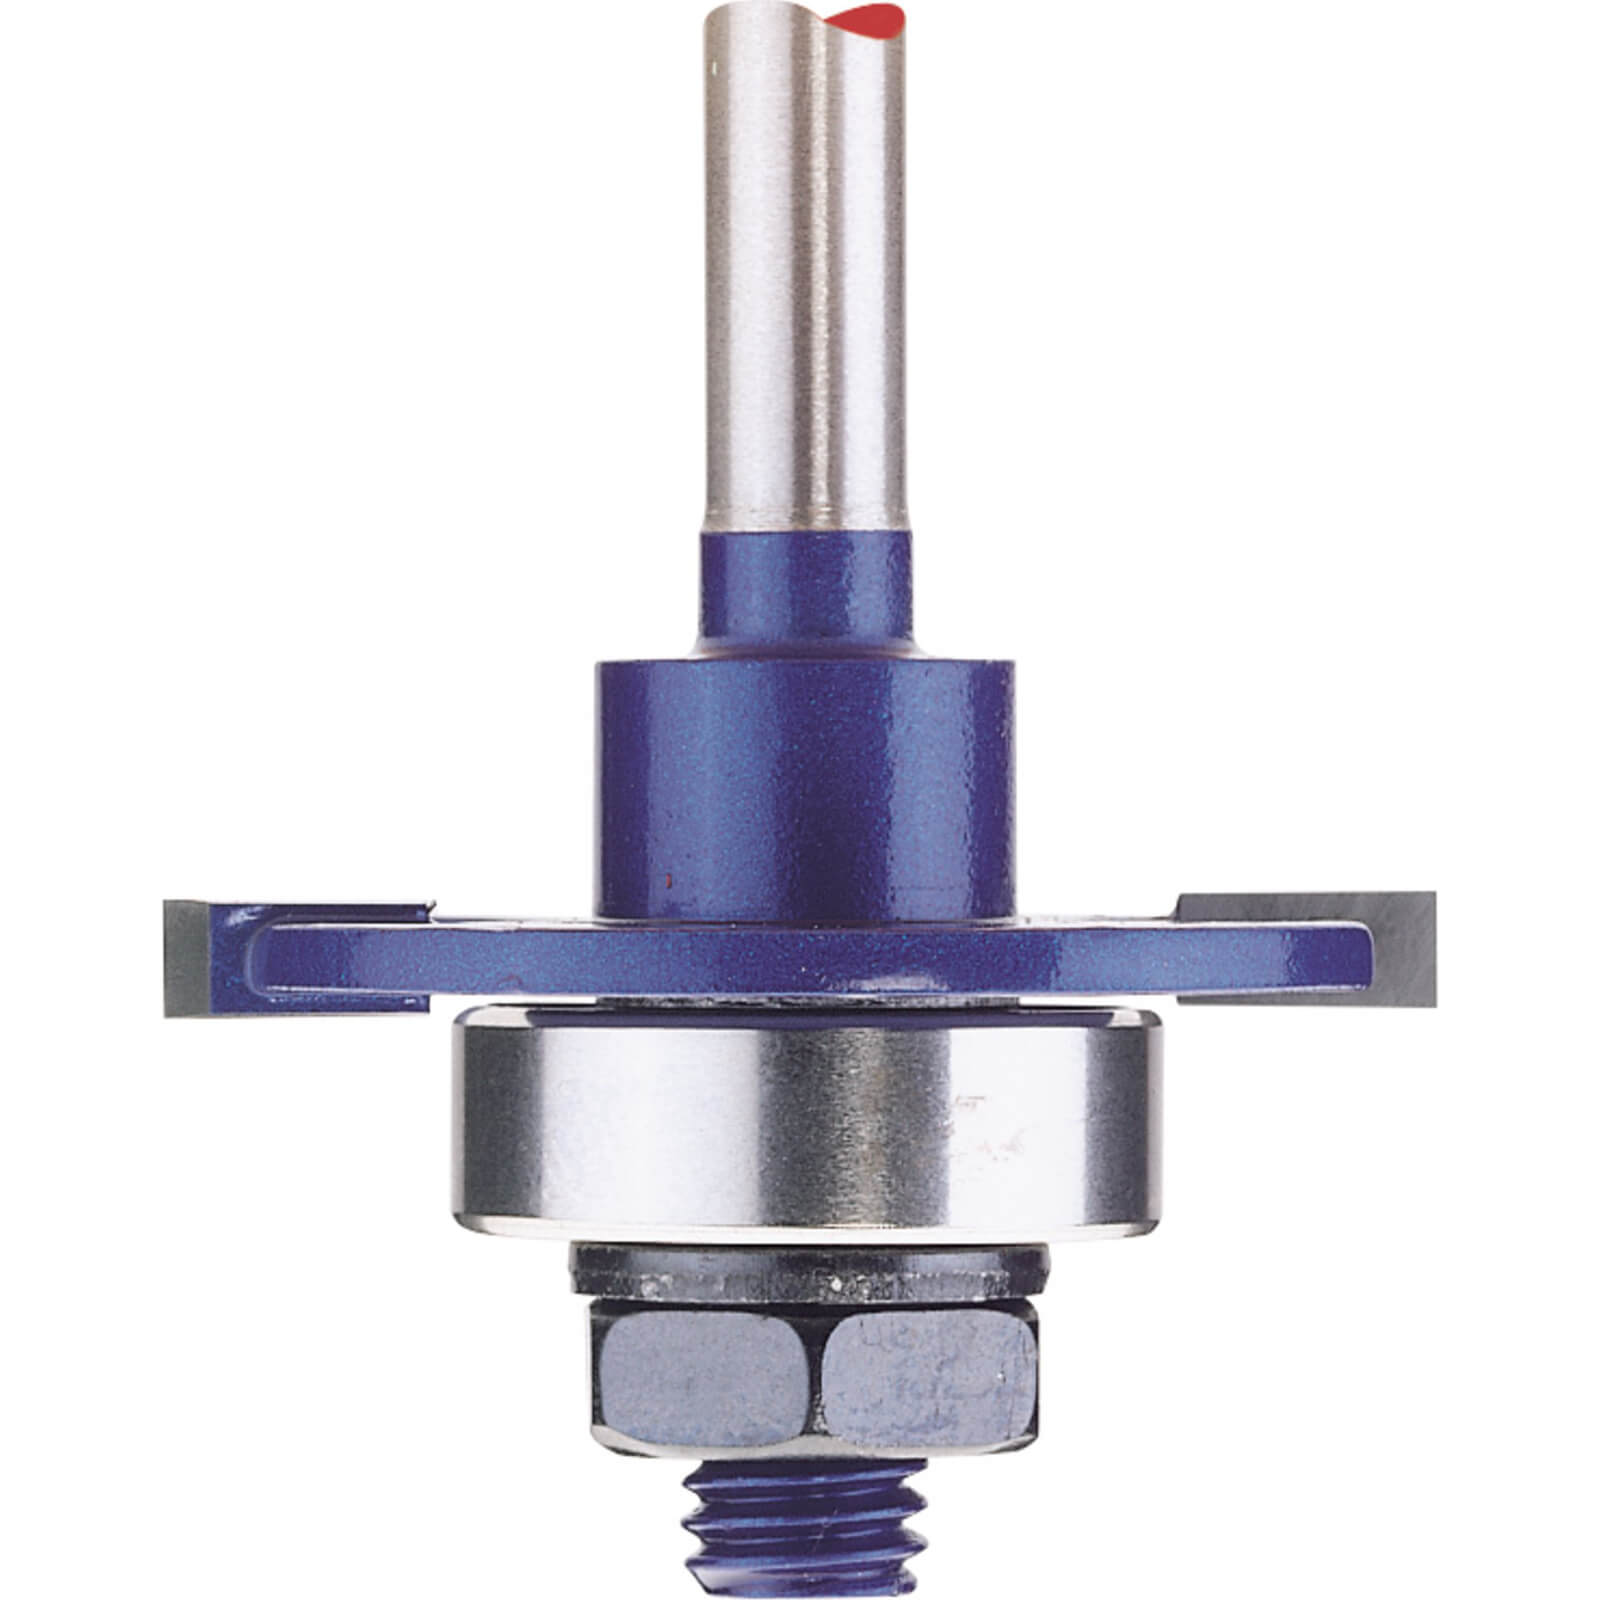 Image of Draper 1/4" Biscuit No. 20 Tct Router Bit